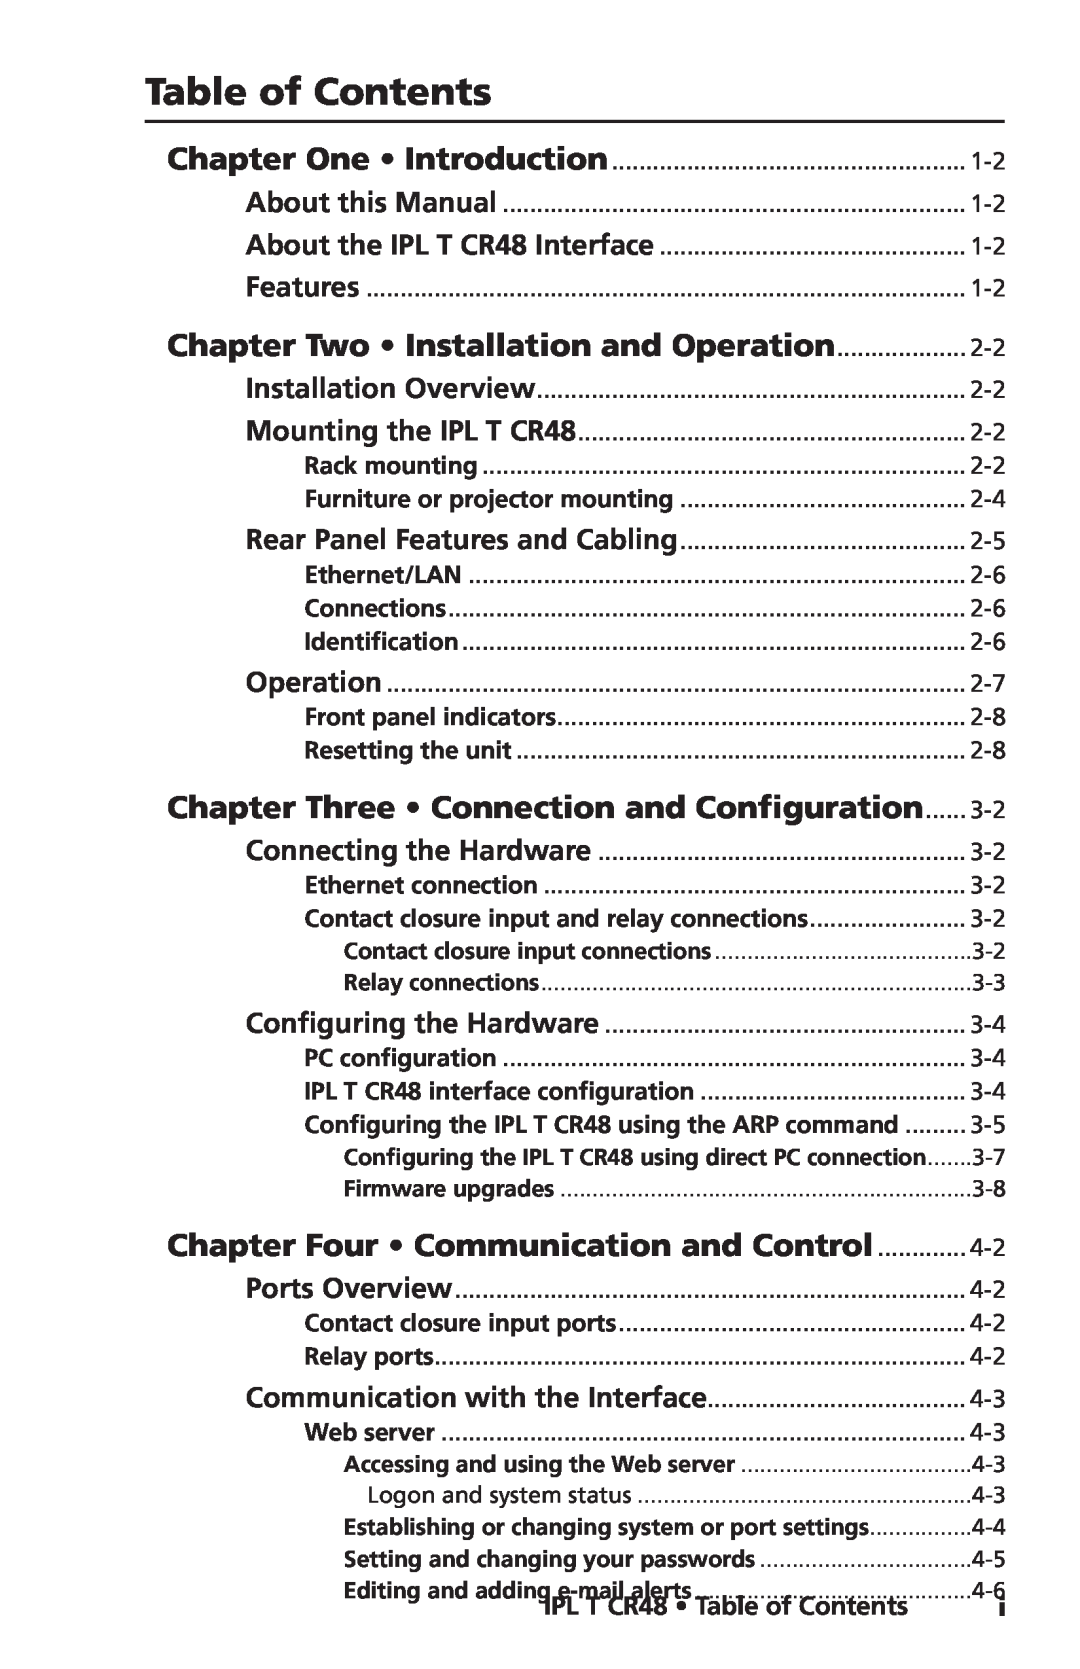 Extron electronic manual Chapter Two Installation and Operation, IPL T CR48 Table of Contents 